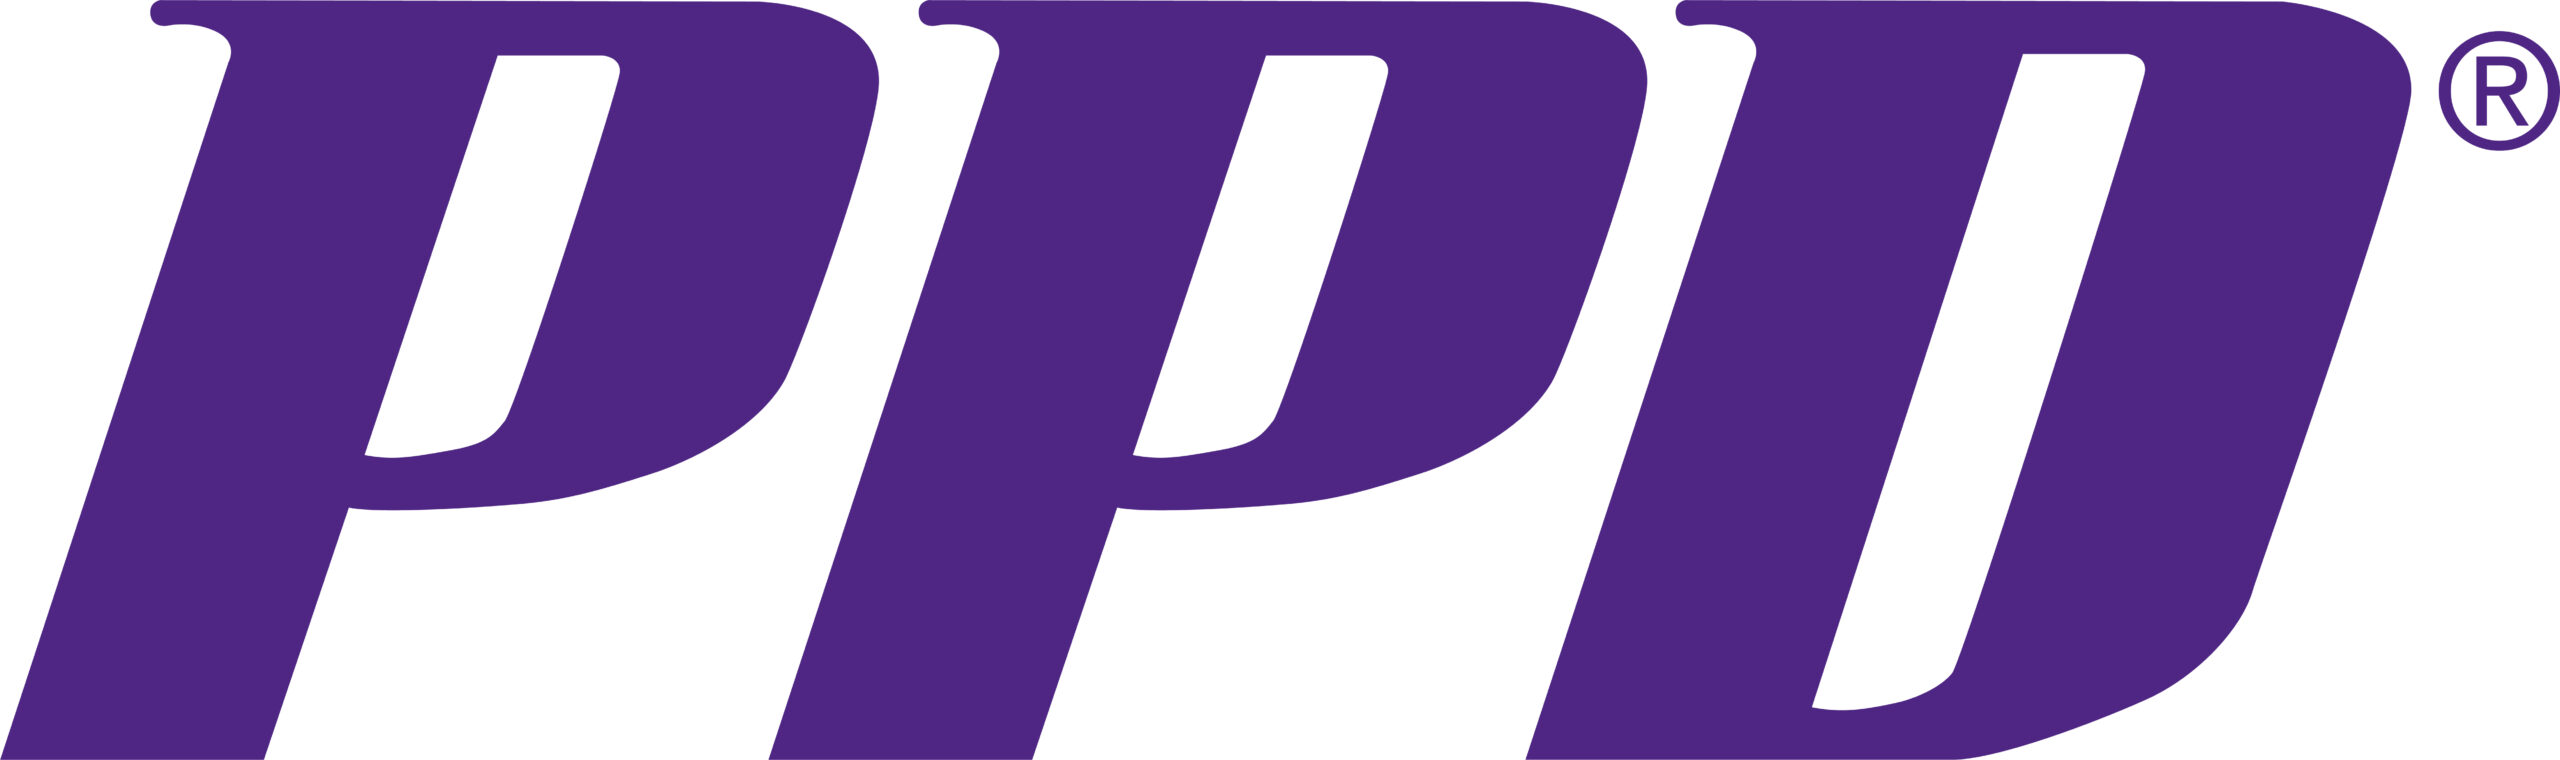 PPD Logo 1920x1080 1 scaled